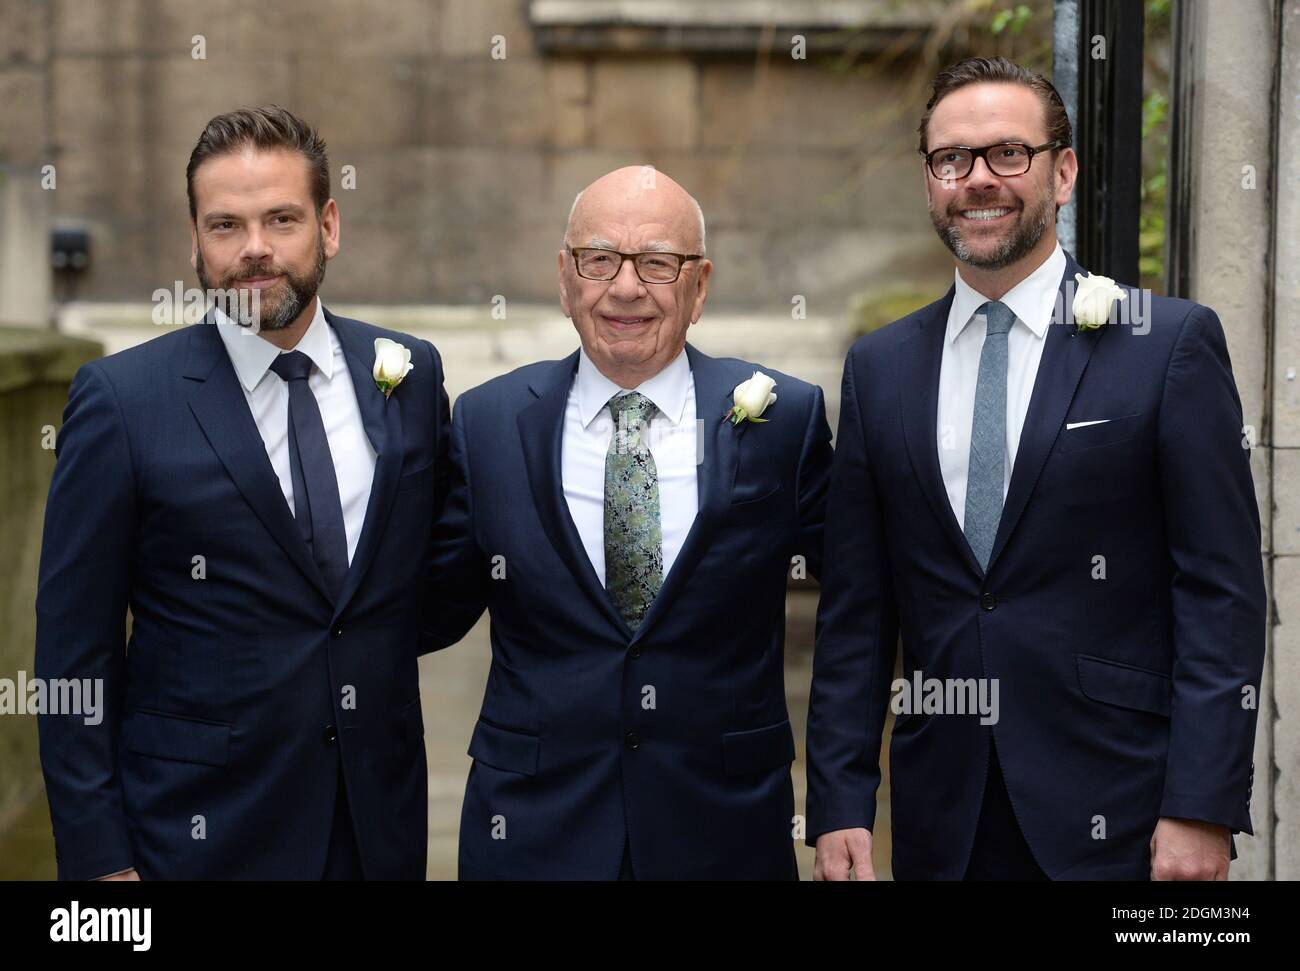 Rupert Murdoch accompanied by his sons James (right) and Lachlan (left) attending the Rupert Murdoch and Jerry Hall Wedding Blessing at St Brides Church, Fleet St, London Stock Photo